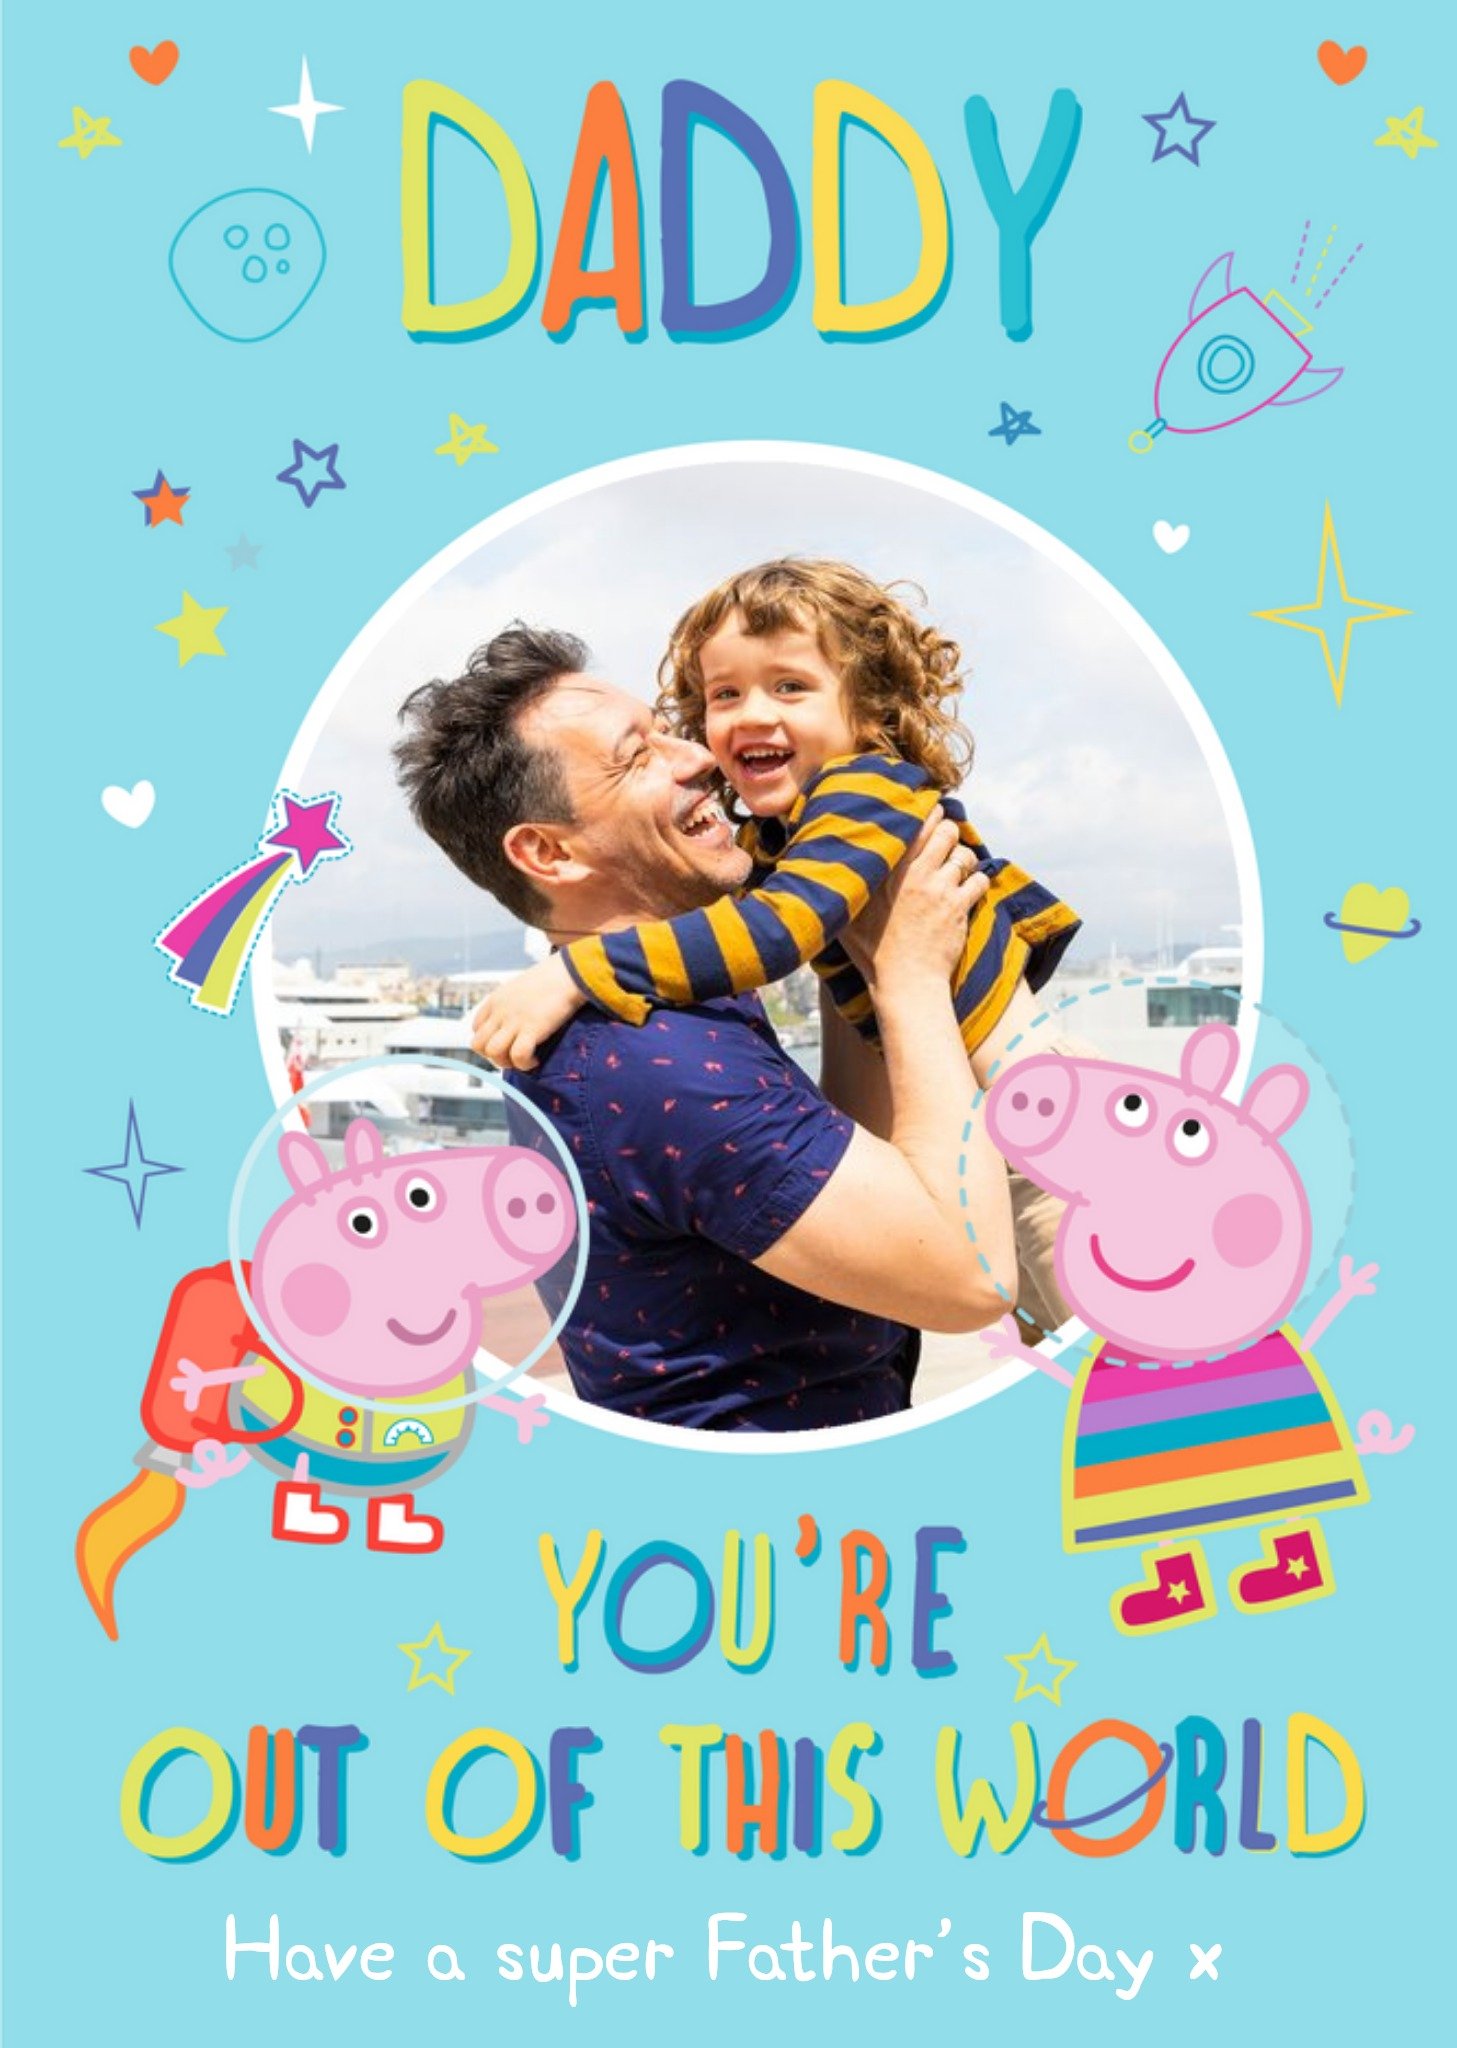 Peppa Pig Daddy You're Out Of This World Happy Father's Day Photo Card, Large